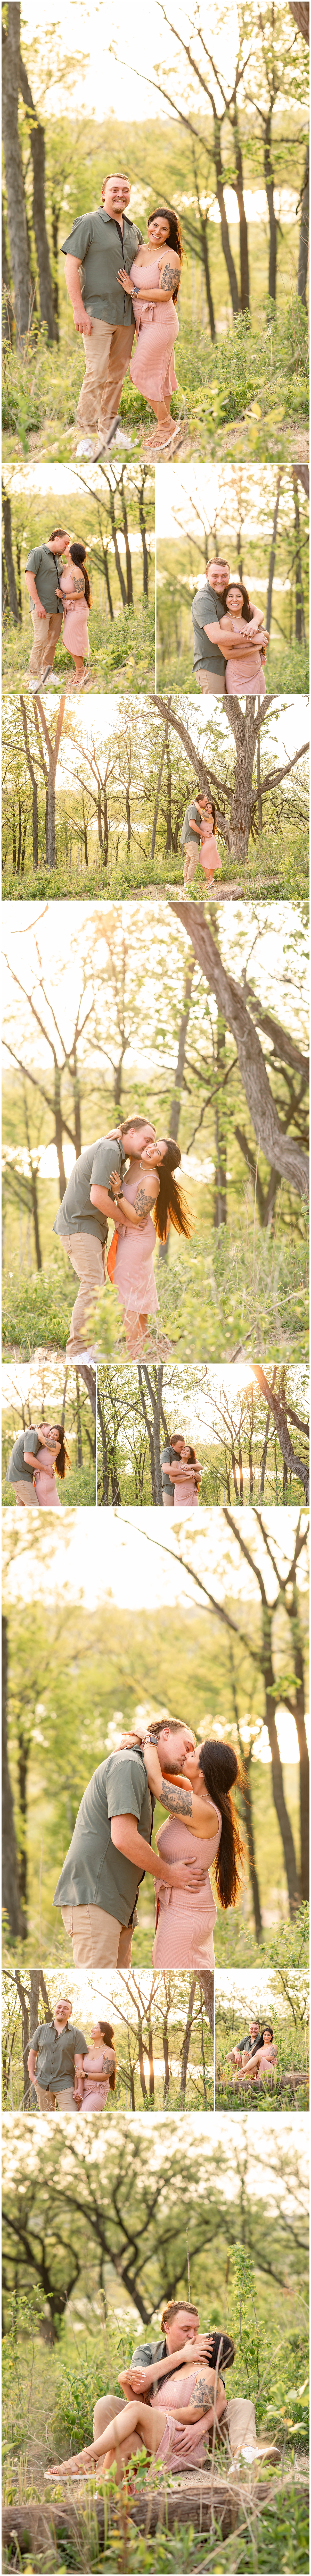 Indian Lake Engagement Session, spring time 